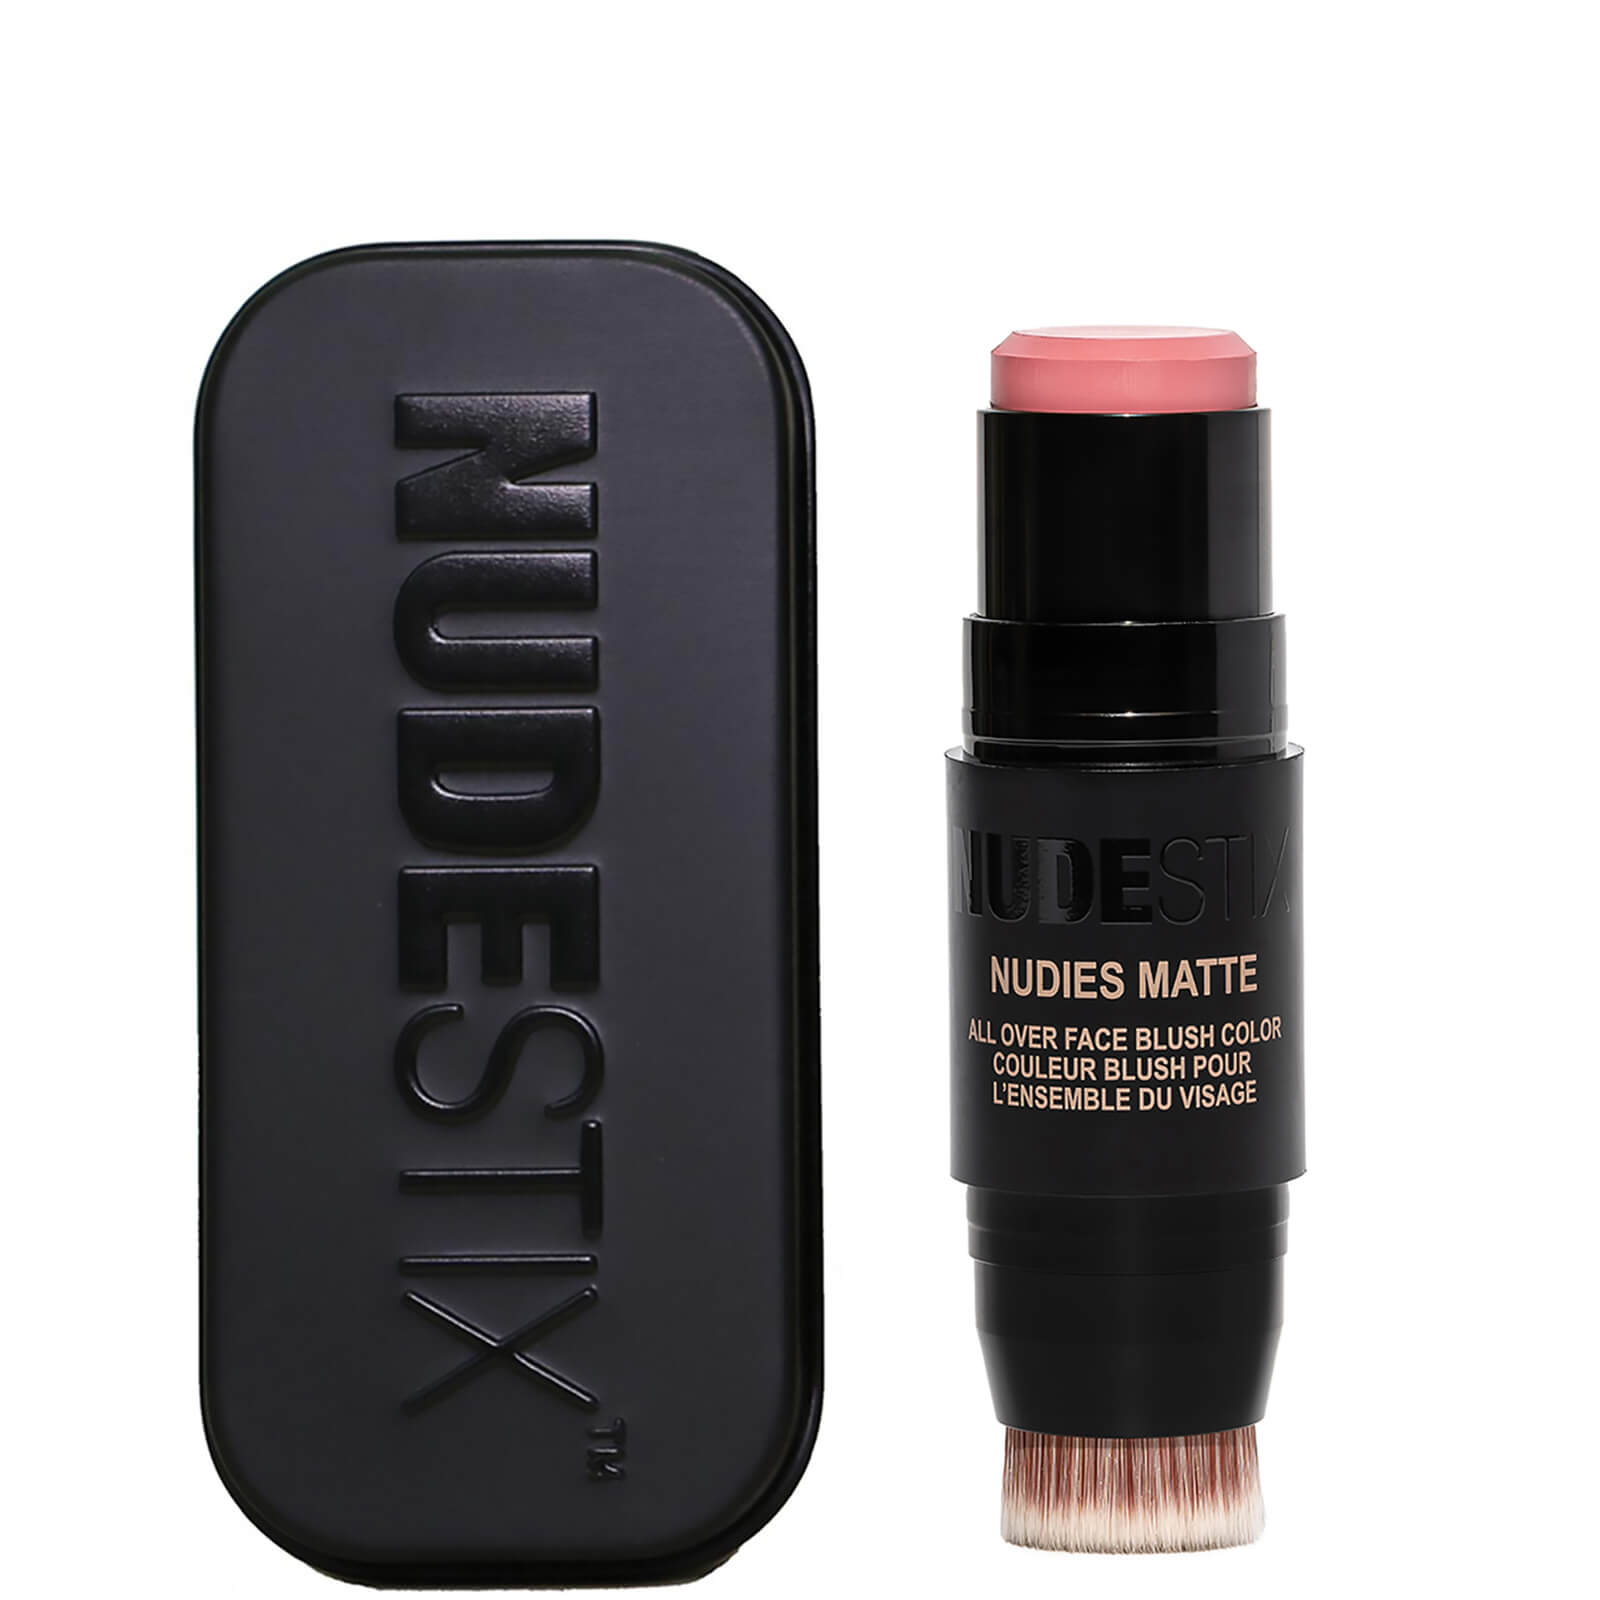 Nudestix Nudies Matte All Over Face Blush Colour 7g (various Shades) - Sunkissed Pink